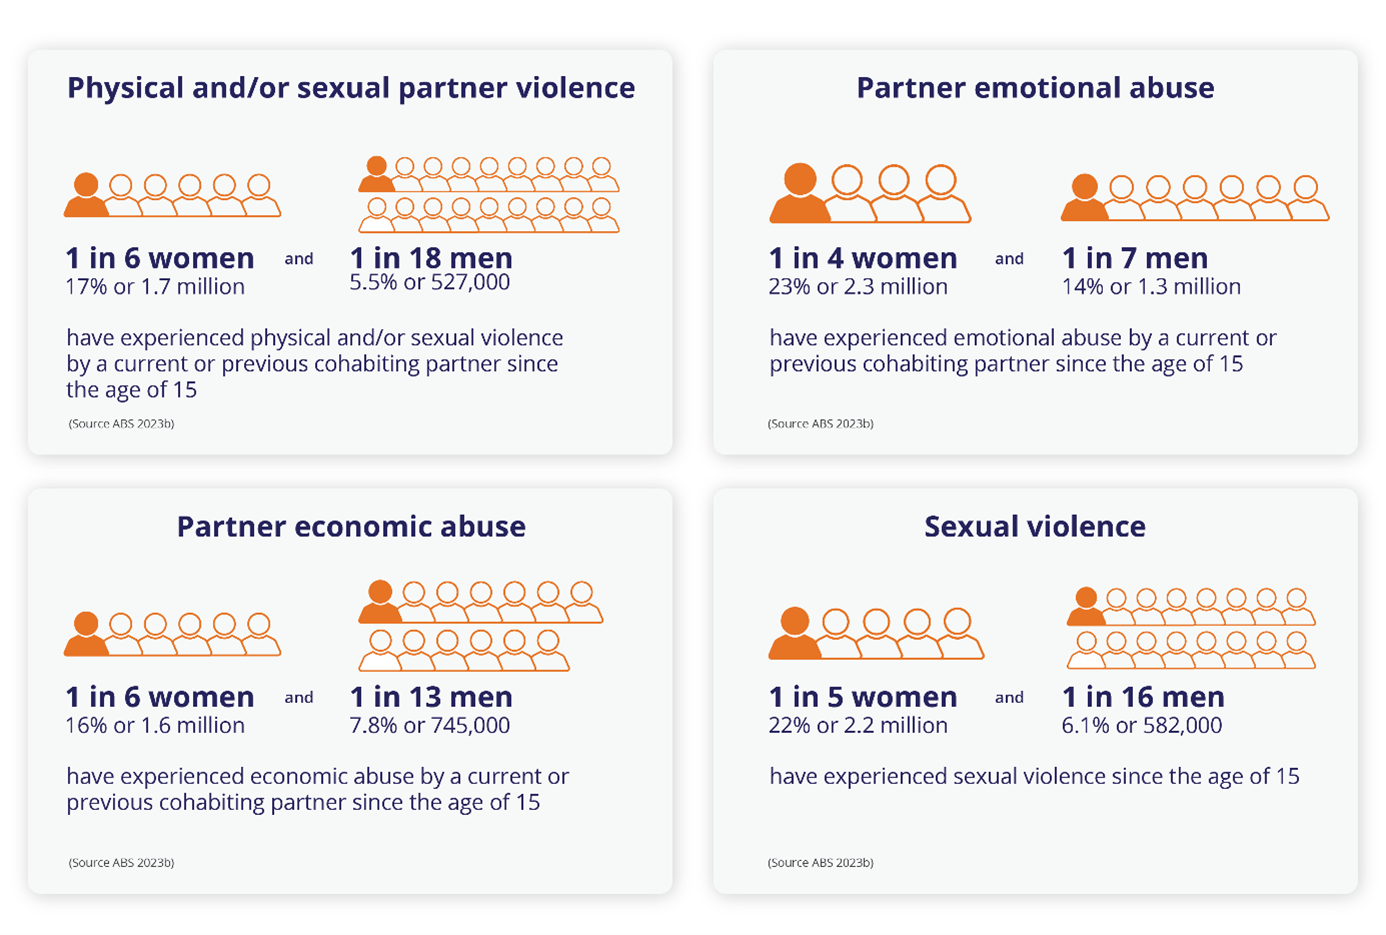 This infographic shows that in 2021–22 1 in 6 women and 1 in 18 men had experienced physical and/or sexual violence by a current or previous partner since the age of 15.  This infographic shows that in 2021–22 2 in 9 women and 1 in 7 men had experienced emotional abuse by a current or previous partner since the age of 15.  This infographic shows that in 2021–22 1 in 6 women and 1 in 13 men had experienced economic abuse by a current or previous partner since the age of 15.  This infographic shows that in 2021–22 2 in 9 women and 1 in 16 men had experienced sexual violence since the age of 15.